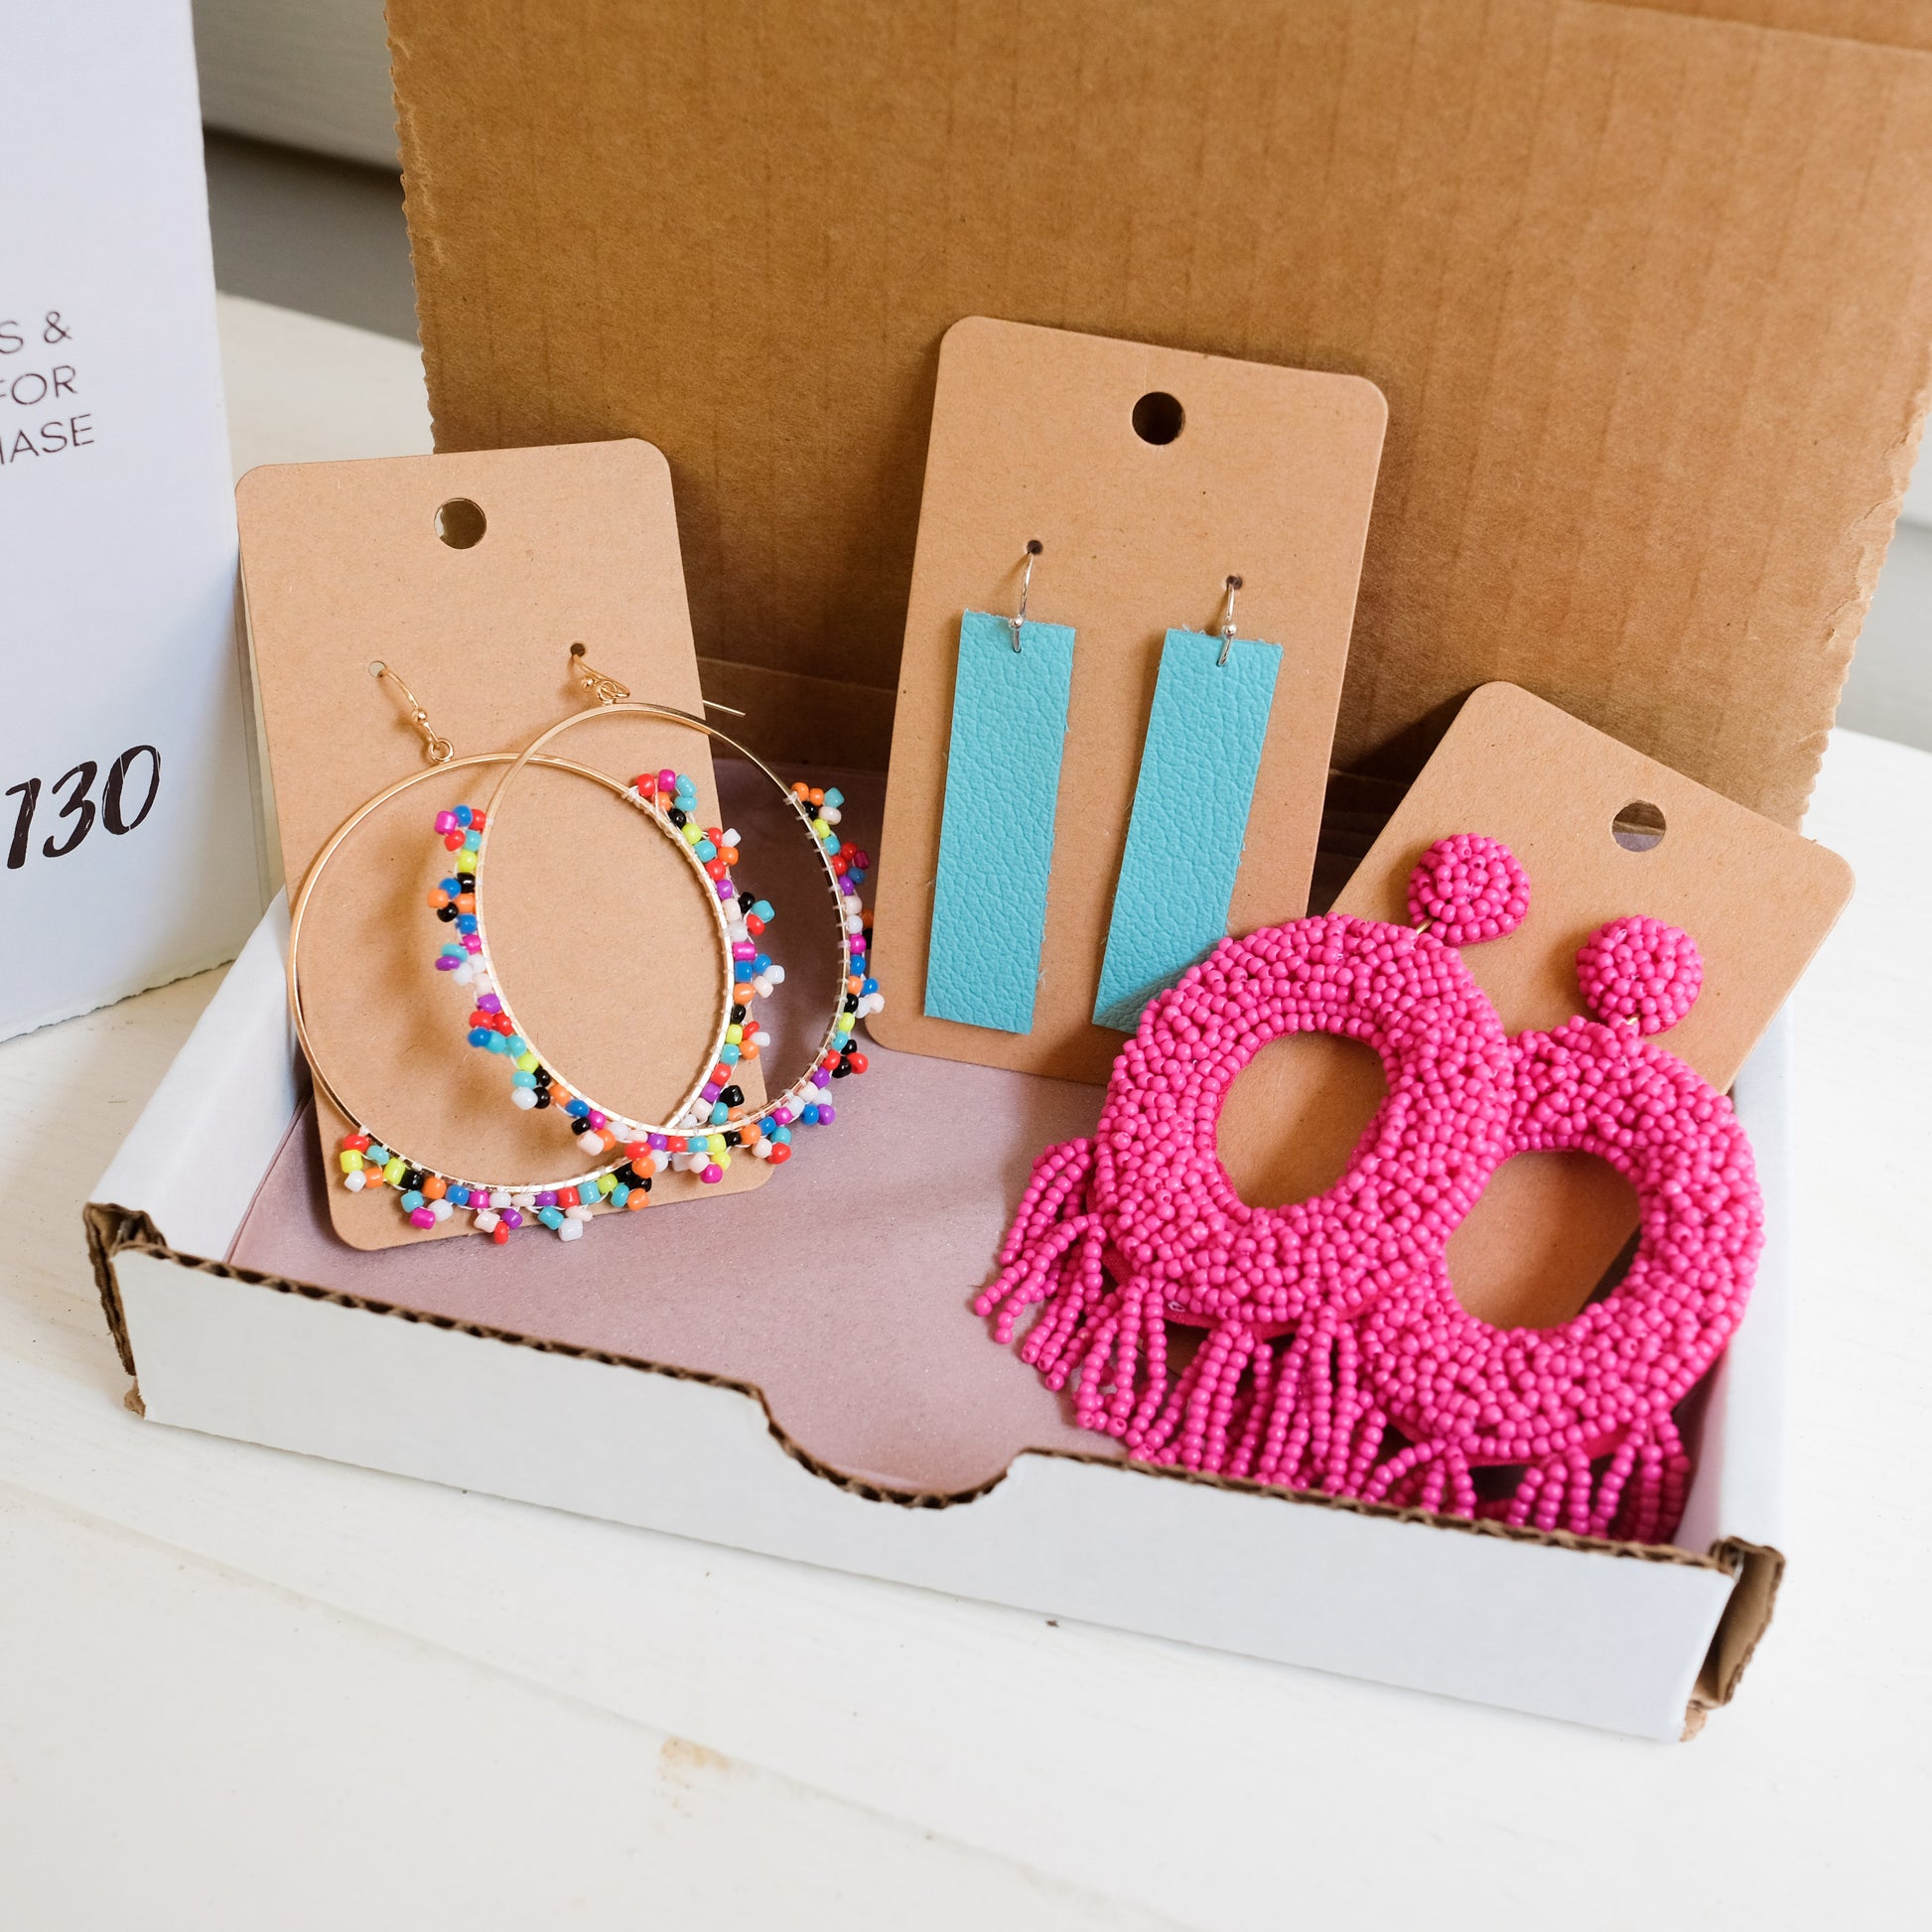 Monthly Accessory Subscription Box - Shoppe3130